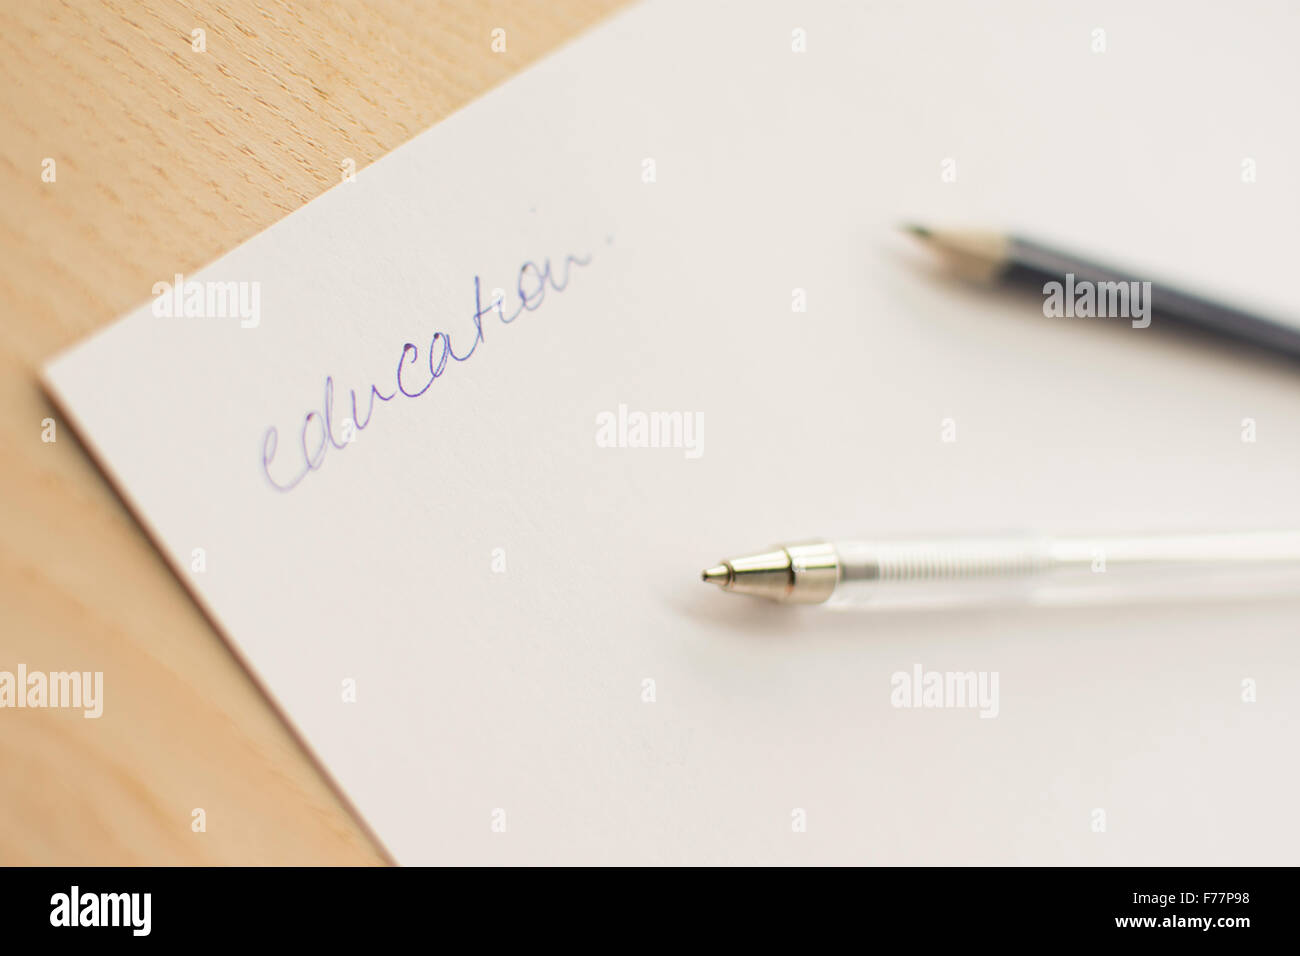 The word 'education' in blue pen on white paper laid out on a wooden board or table top. Stock Photo